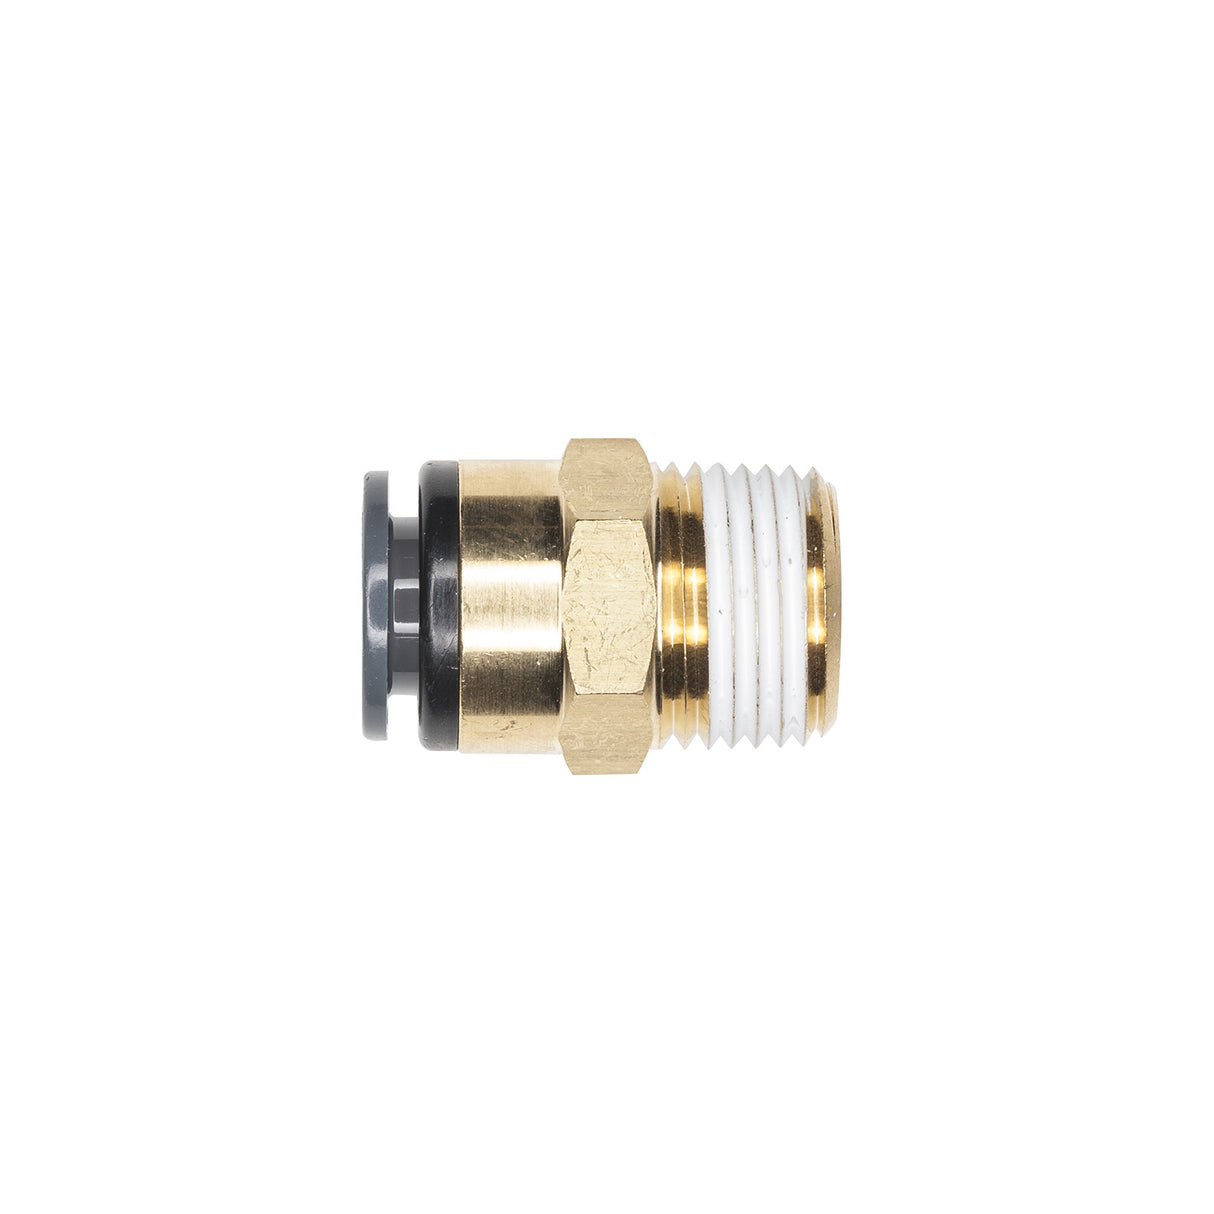 VELVAC ­-­ 016189 ­-­ FITTING CONNECTOR MALE 5/8T 1/2P DOT PUSH COMP